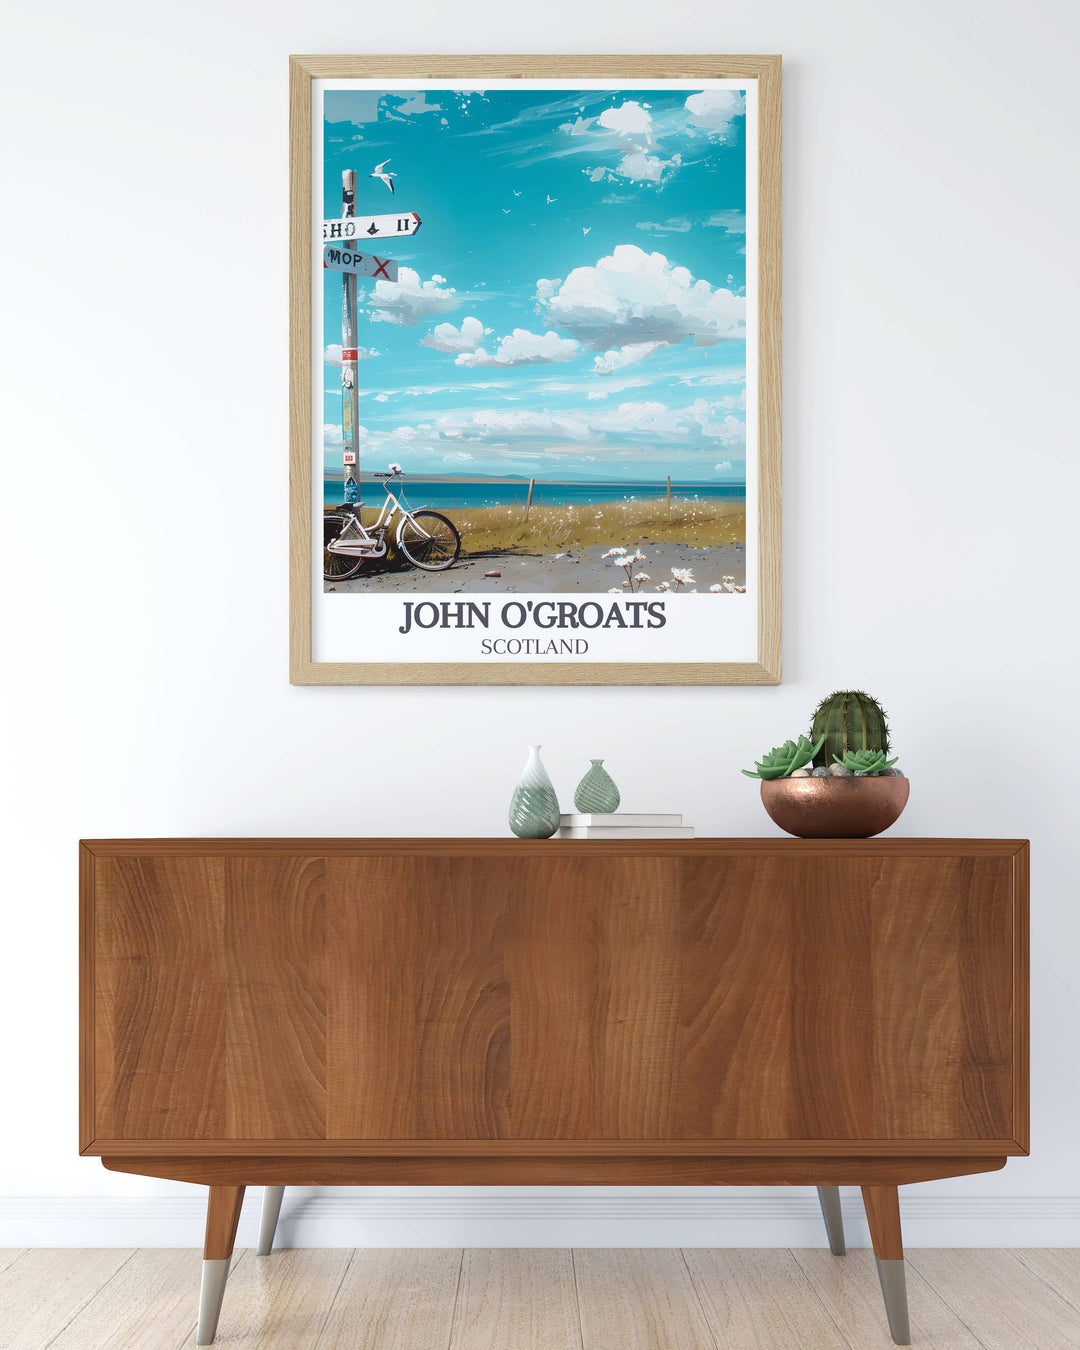 Vintage art of John O Groats Signpost highlighting the start of the ultimate cycling adventure. This print is a perfect gift for cycling enthusiasts who dream of completing the LEJOG Bike Ride. A beautiful addition to any home.